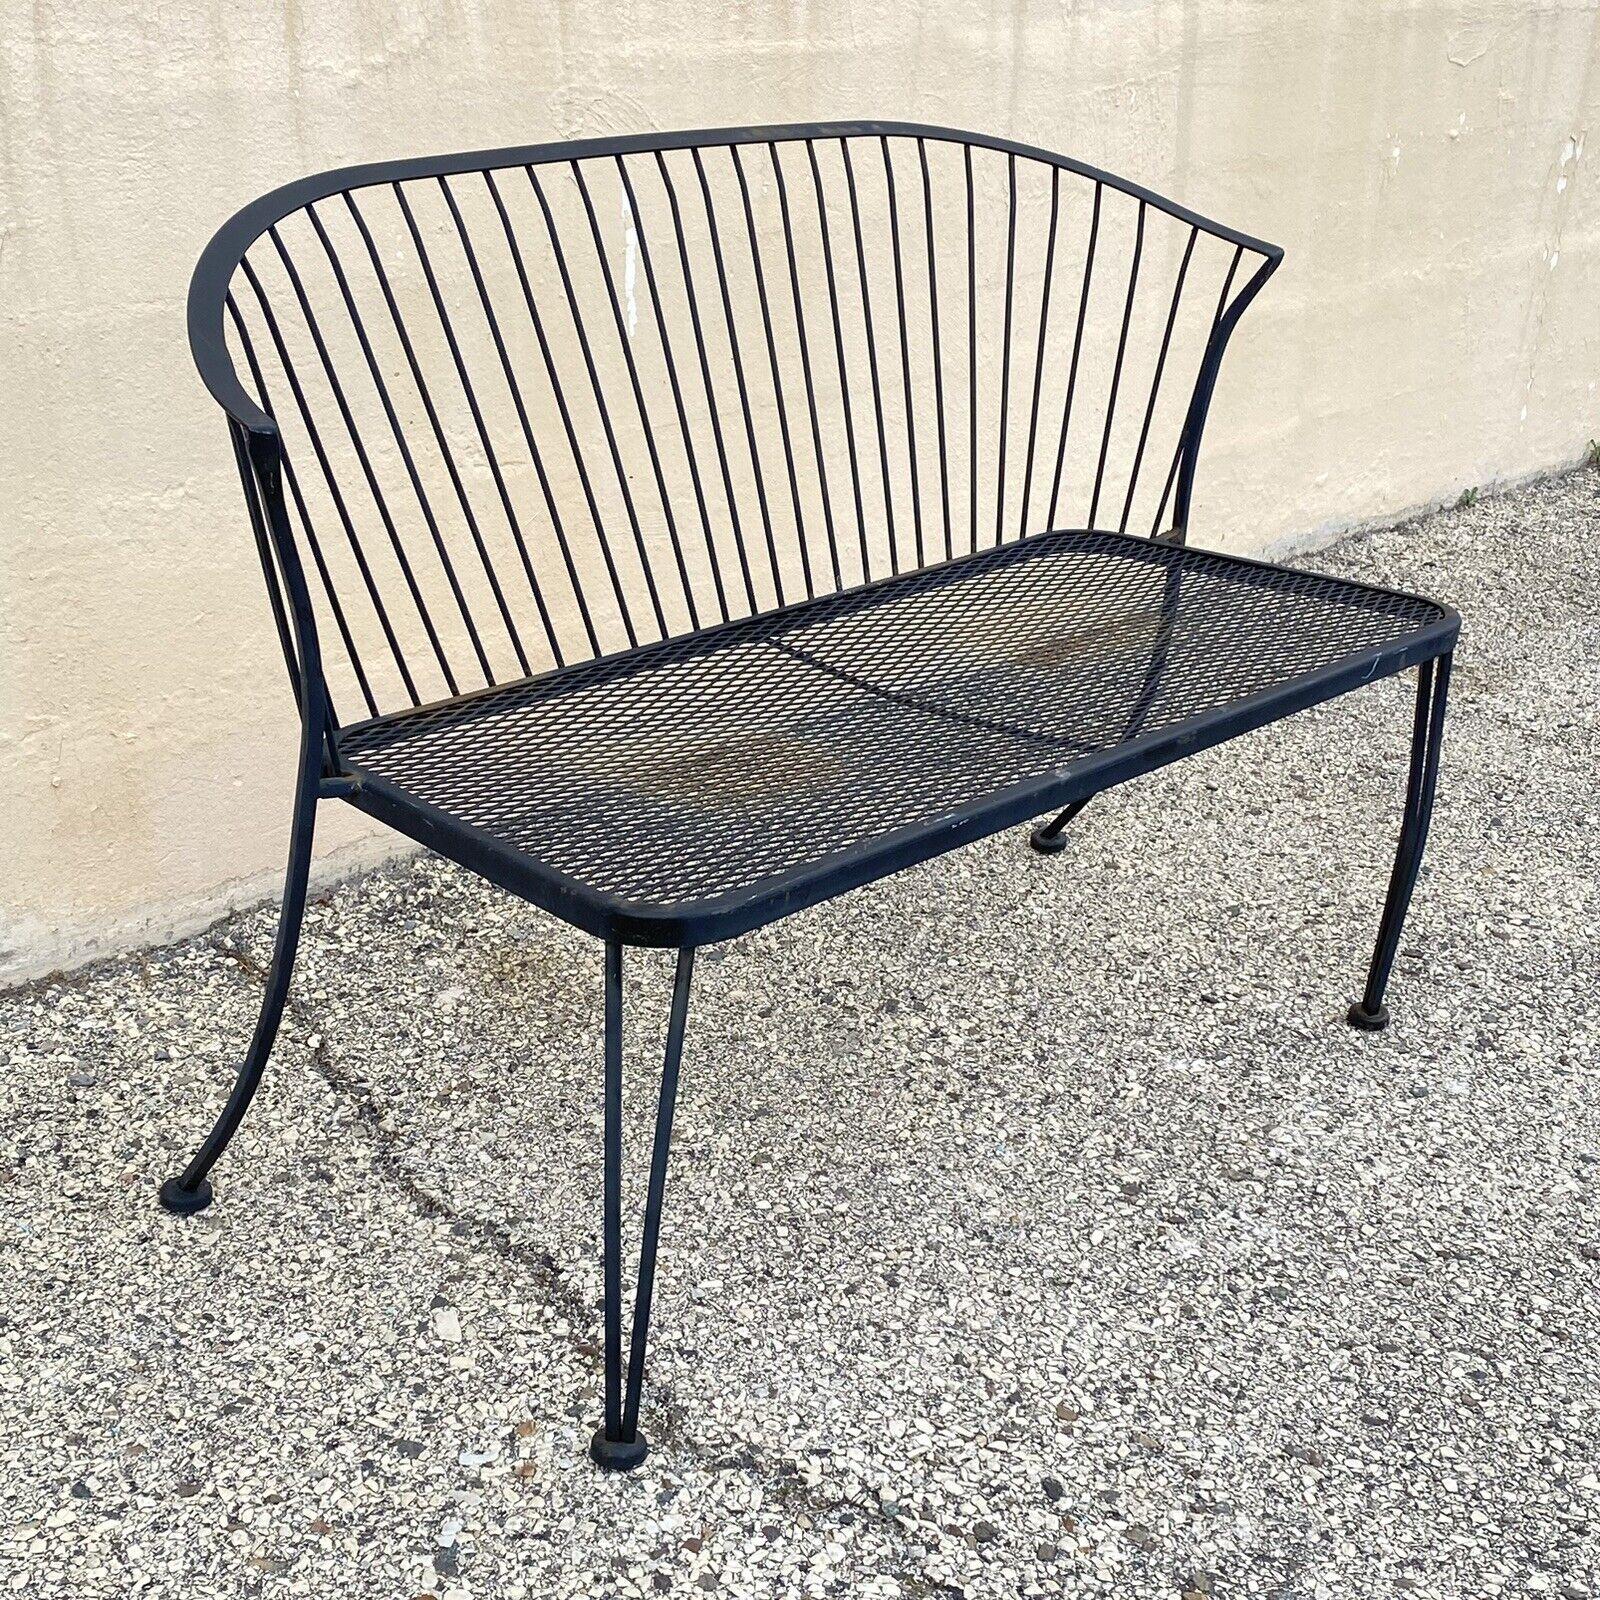 Russell Woodard Pinecrest Style Wrought Iron Garden Patio Loveseat Bench. Circa Mid to Late 20th Century. Dimensions : 31